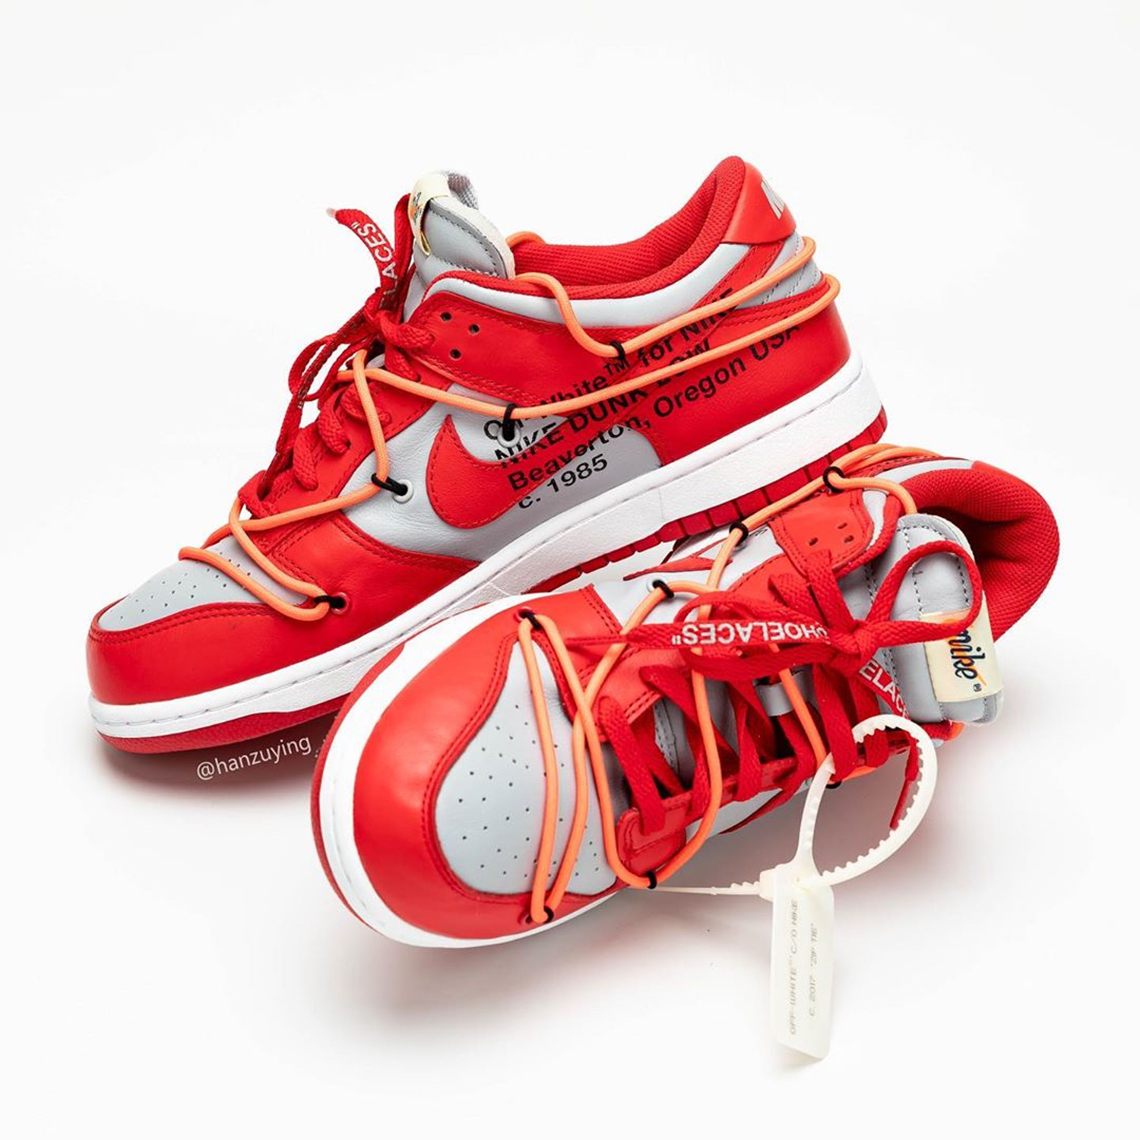 Off-White x Nike Dunk Low 'University Red'